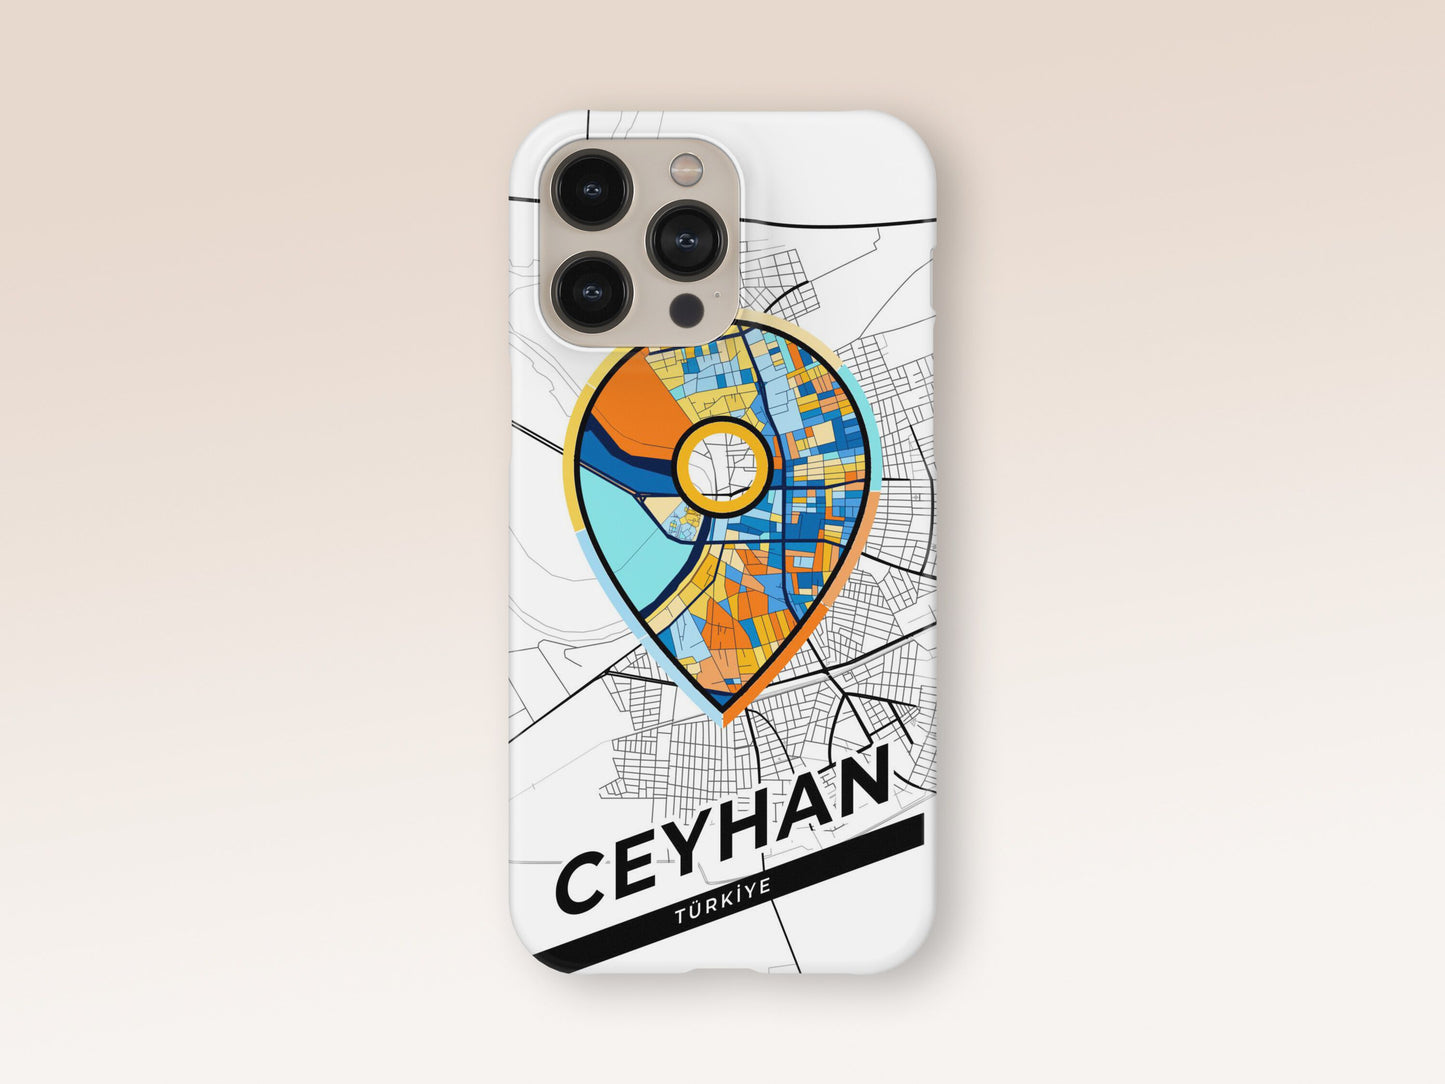 Ceyhan Turkey slim phone case with colorful icon. Birthday, wedding or housewarming gift. Couple match cases. 1